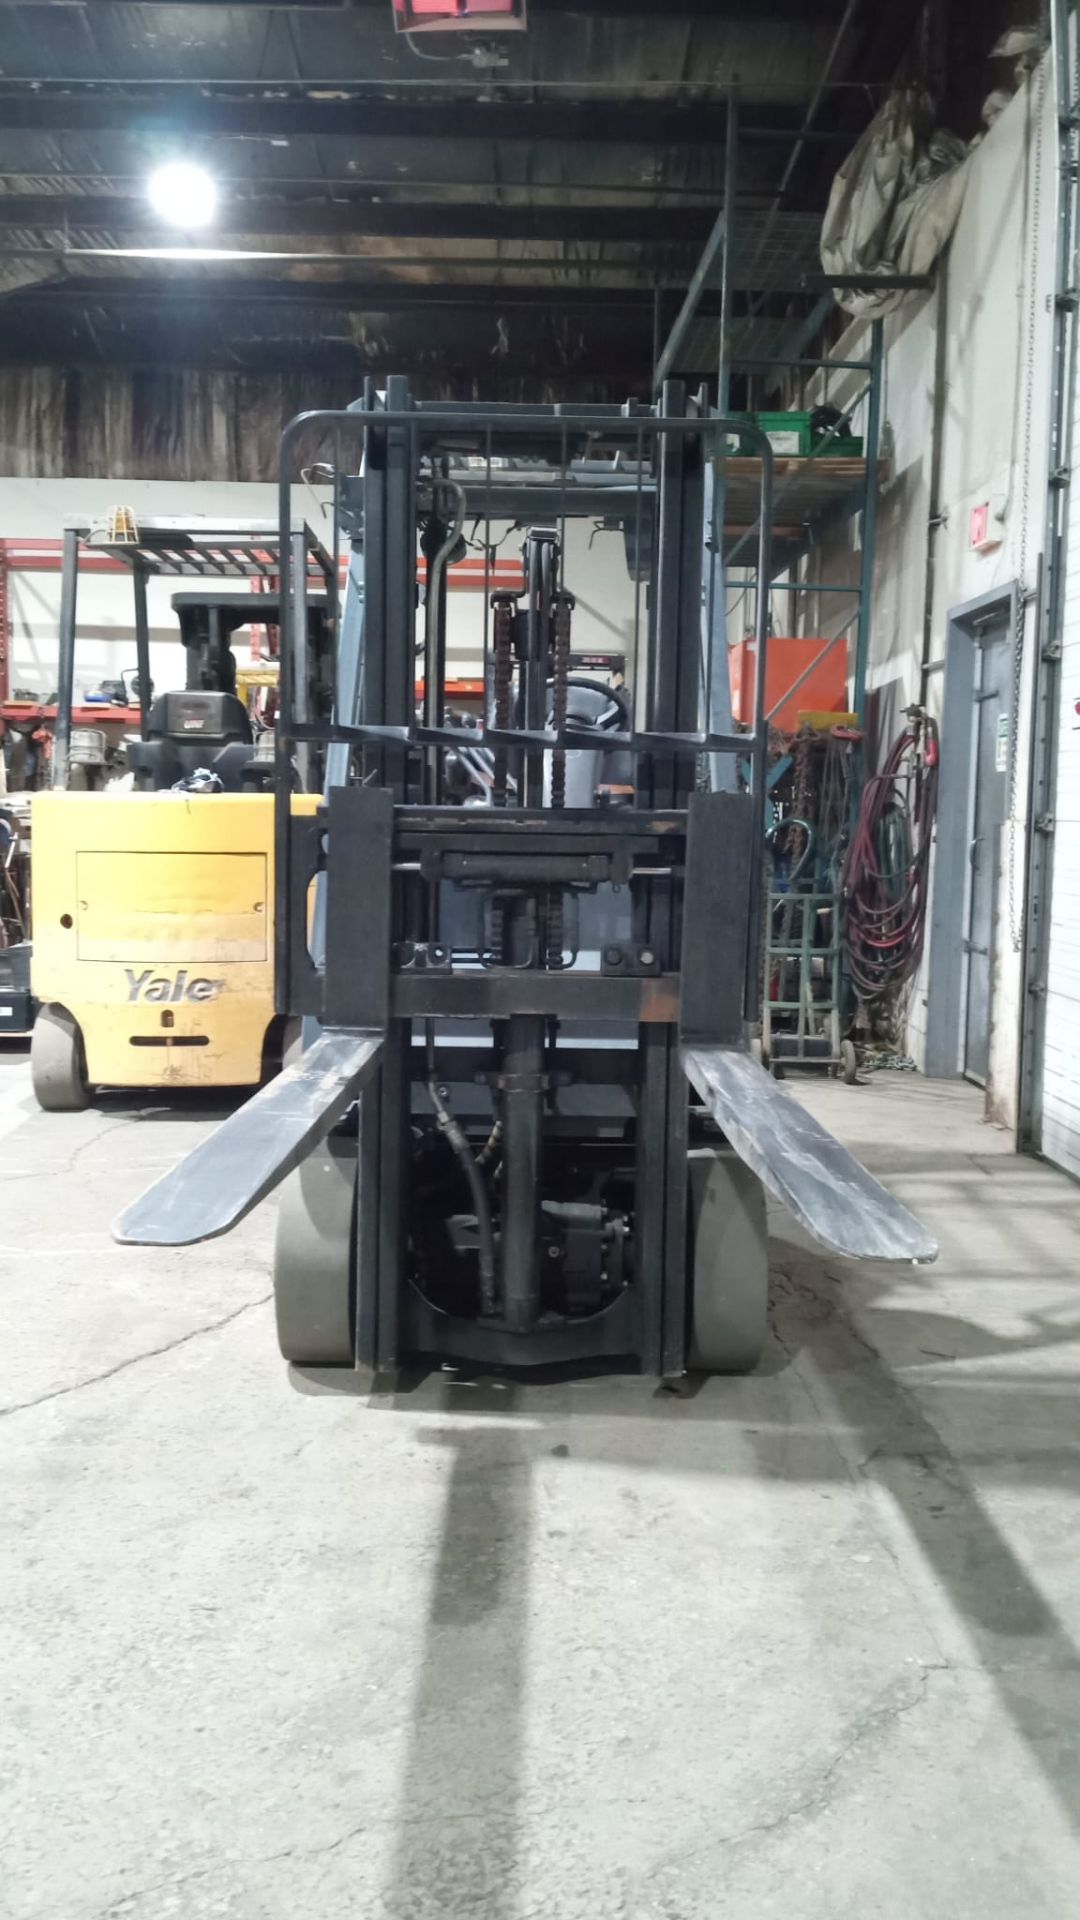 2017 TOYOTA 5,000lbs Capacity Electric Forklift 36V with sideshift and 60" forks - FREE CUSTOMS - Image 6 of 6